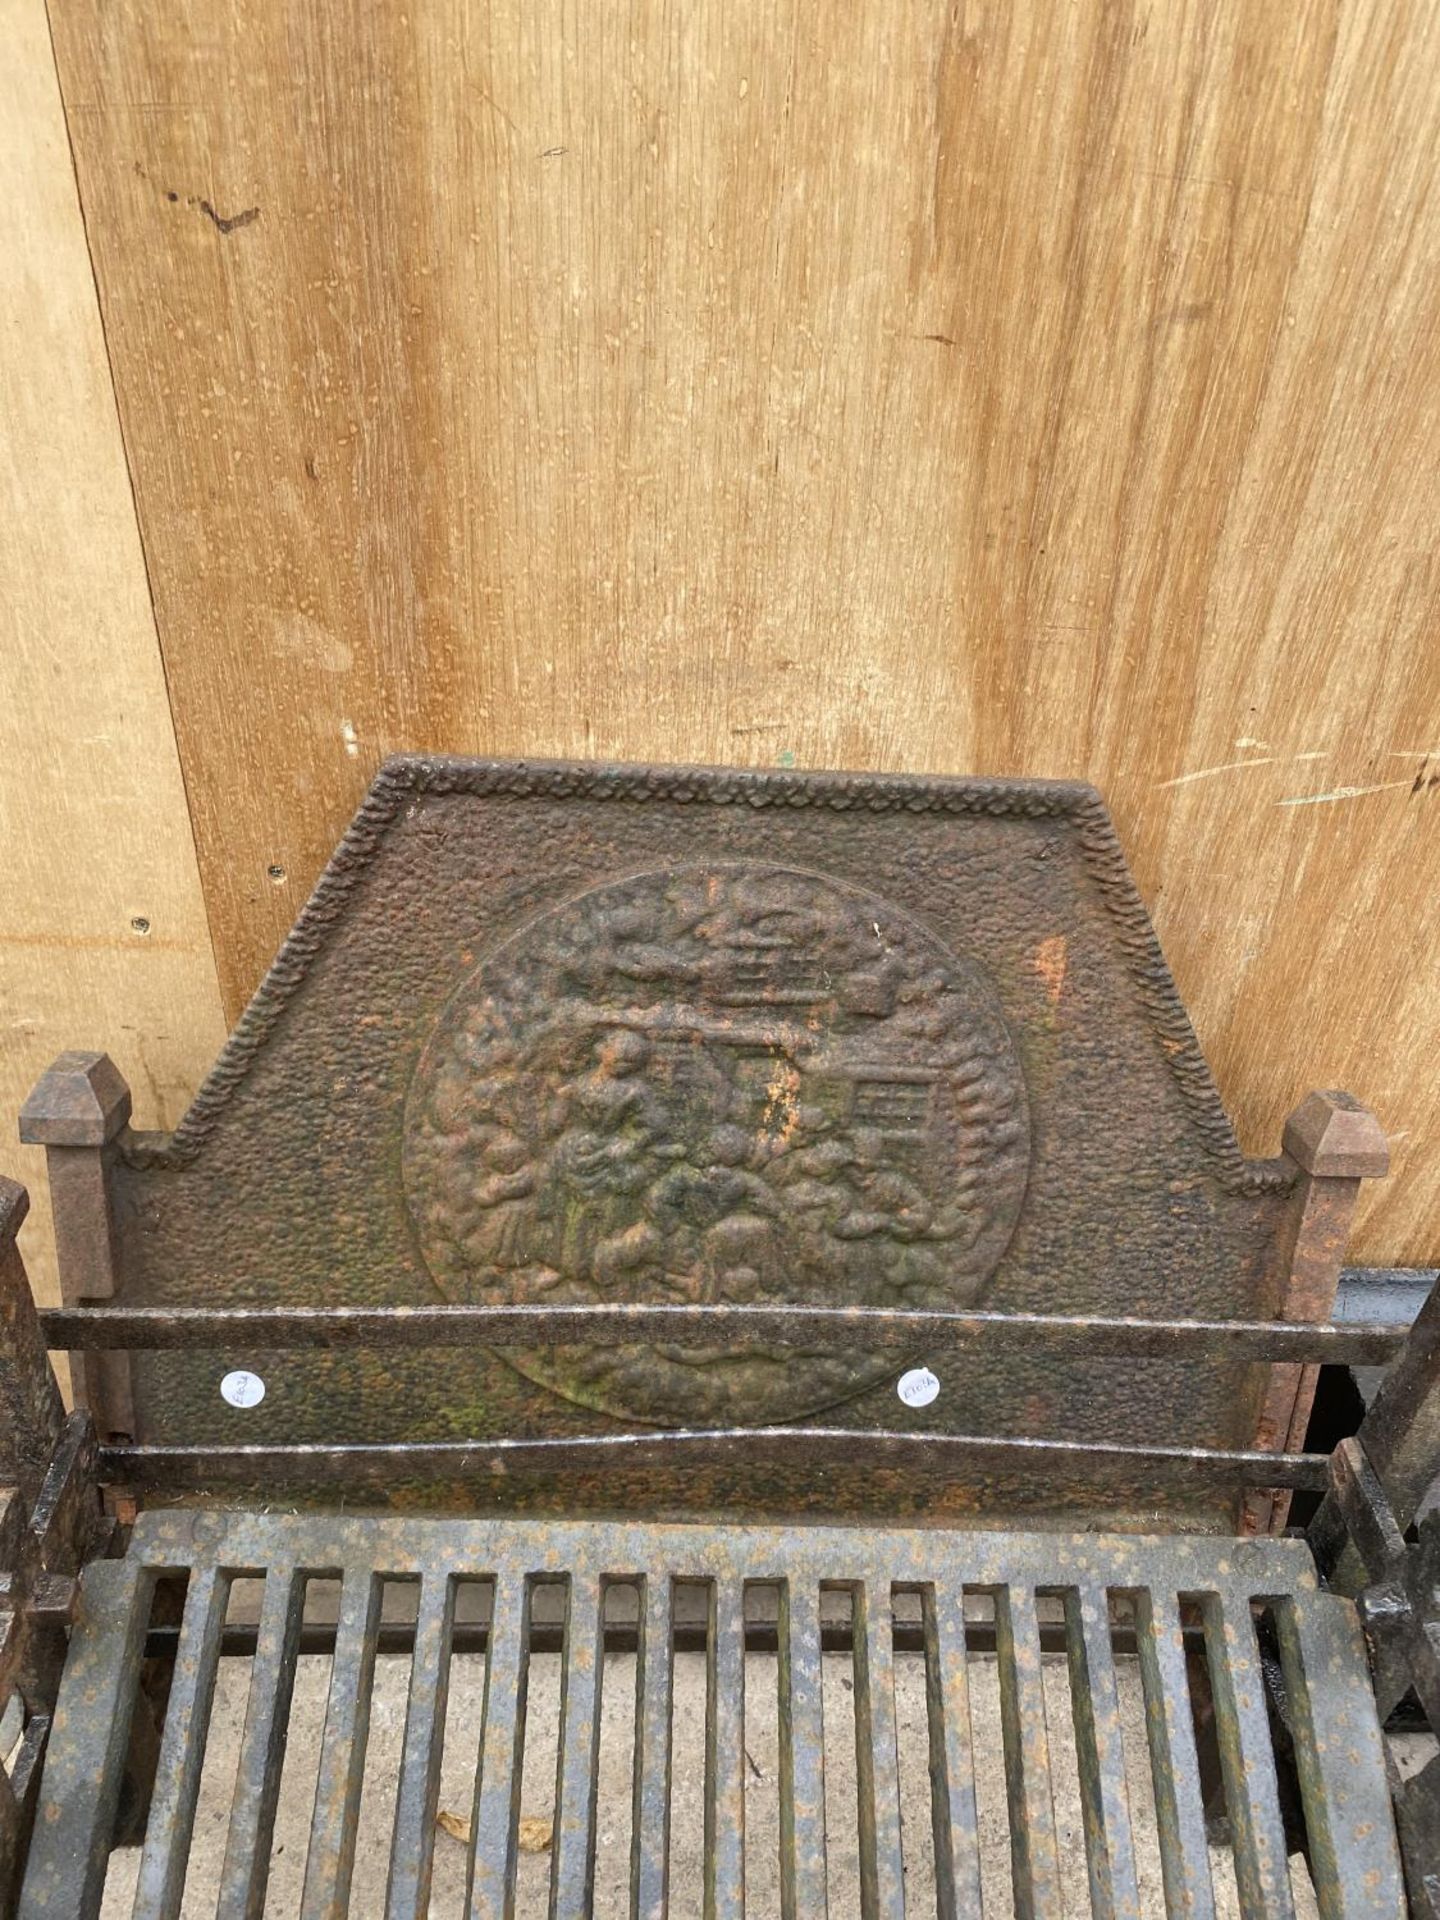 TWO VINTAGE CAST IRON GUTTER HOPPERS AND A CAST IRON FIRE GRATE - Image 5 of 8